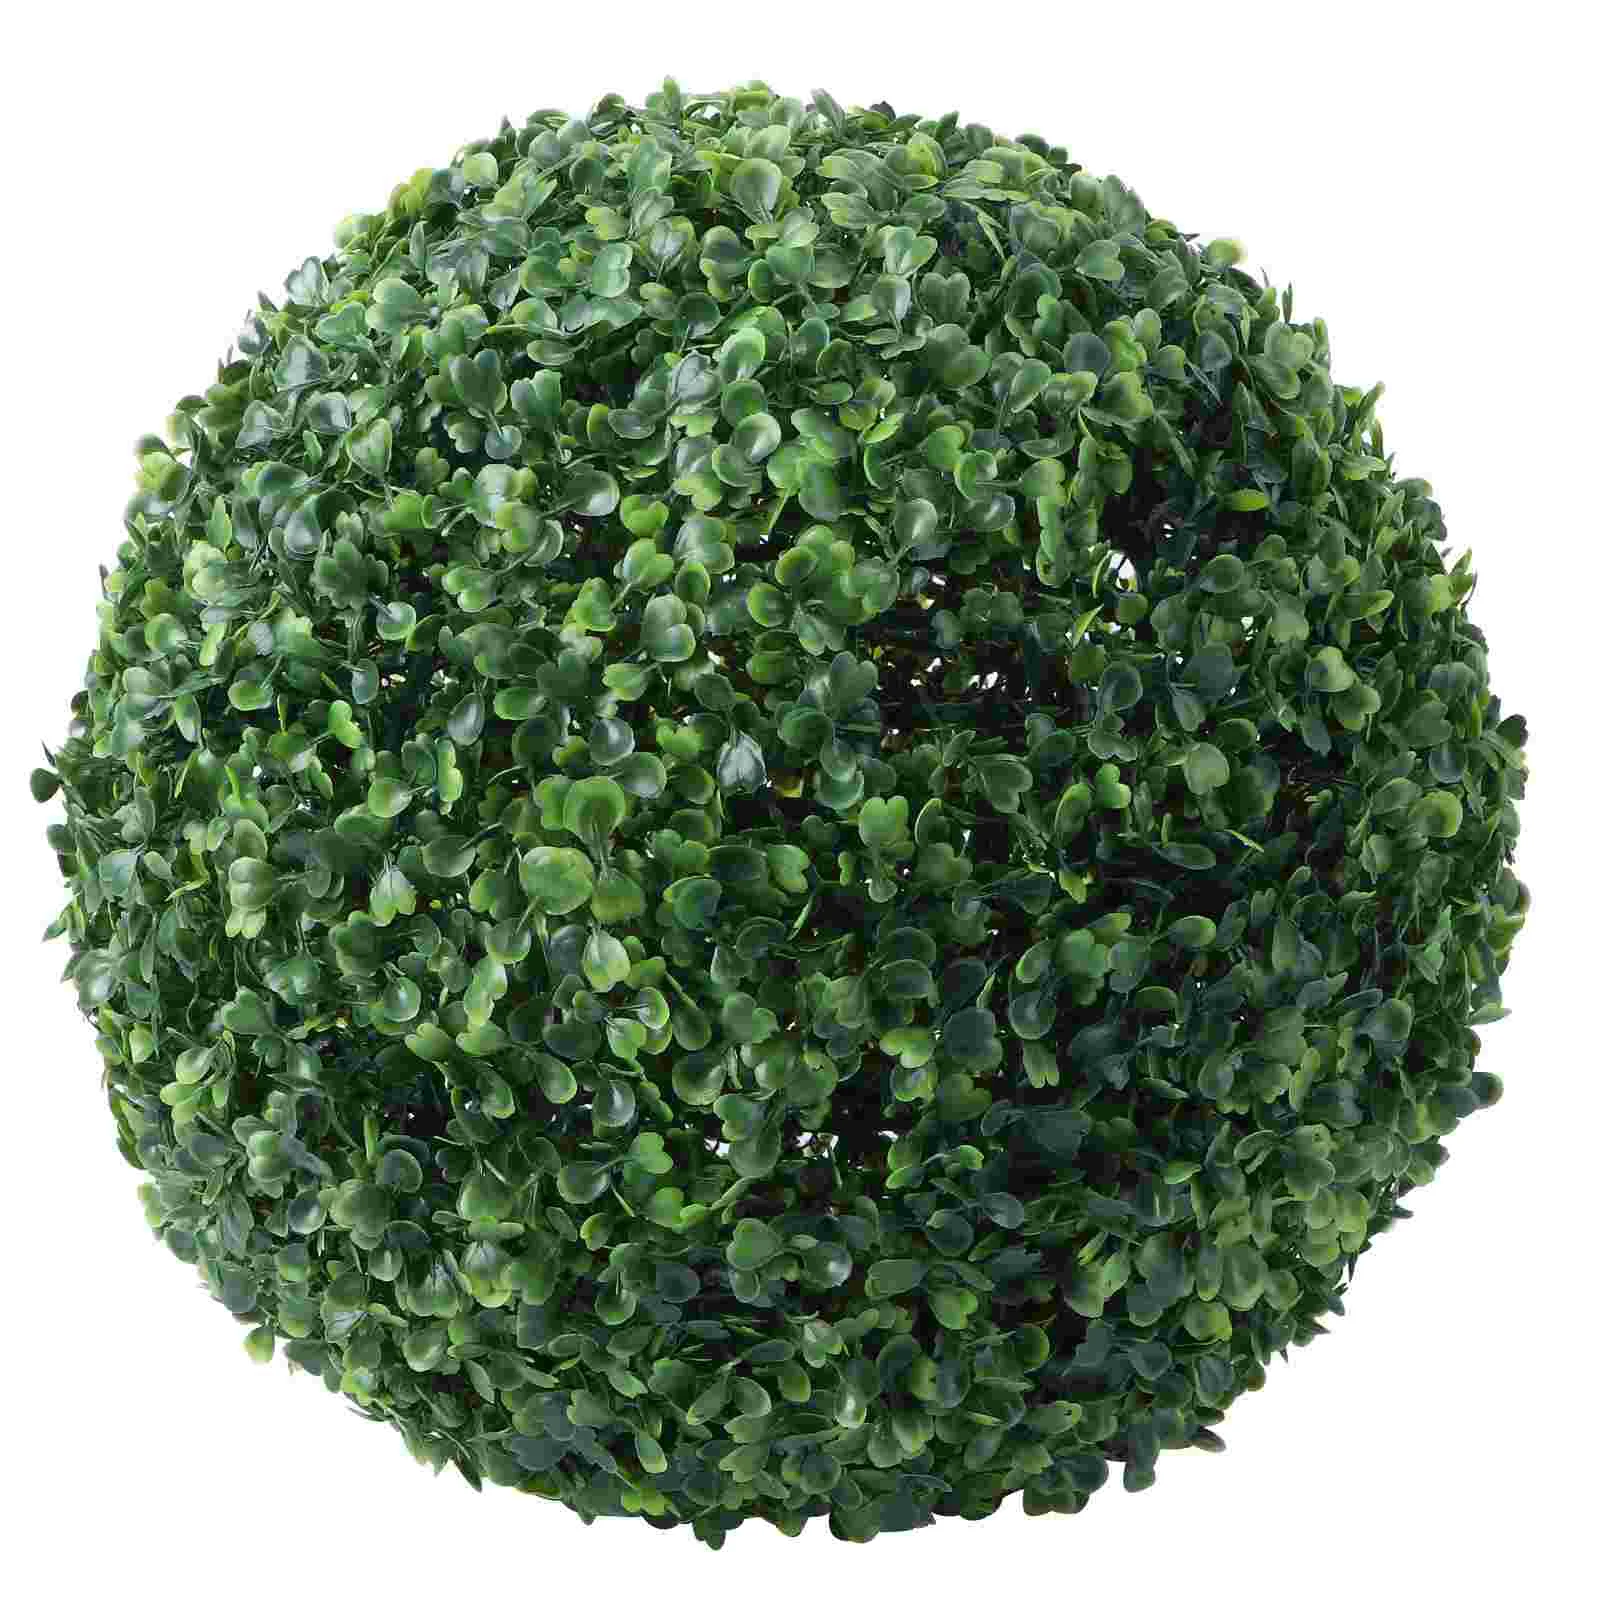 

Ball Topiary Artificial Balls Grass Boxwood Hanging Faux Decorative Outdoor Ornament Green Decor Greenery Simulated Fake Ceiling